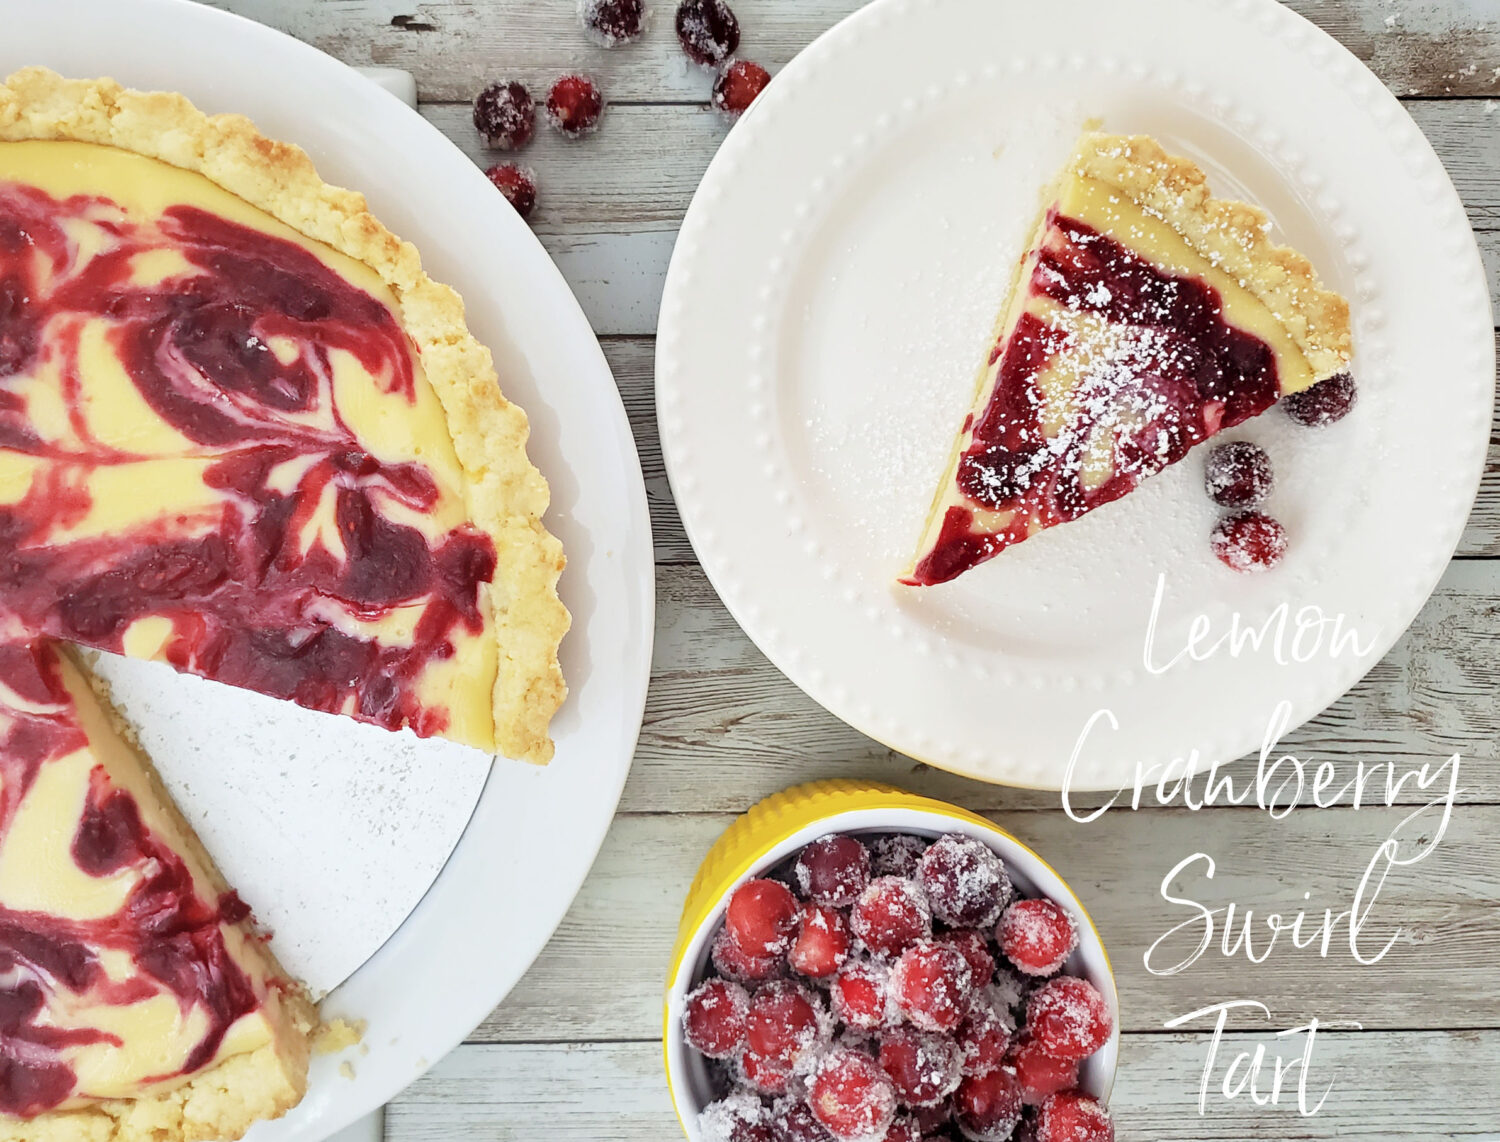 Creamy lemon filling ever with homemade cranberry orange-infused jam in a buttery shortbread crust, topped with luscious sugared cranberries.